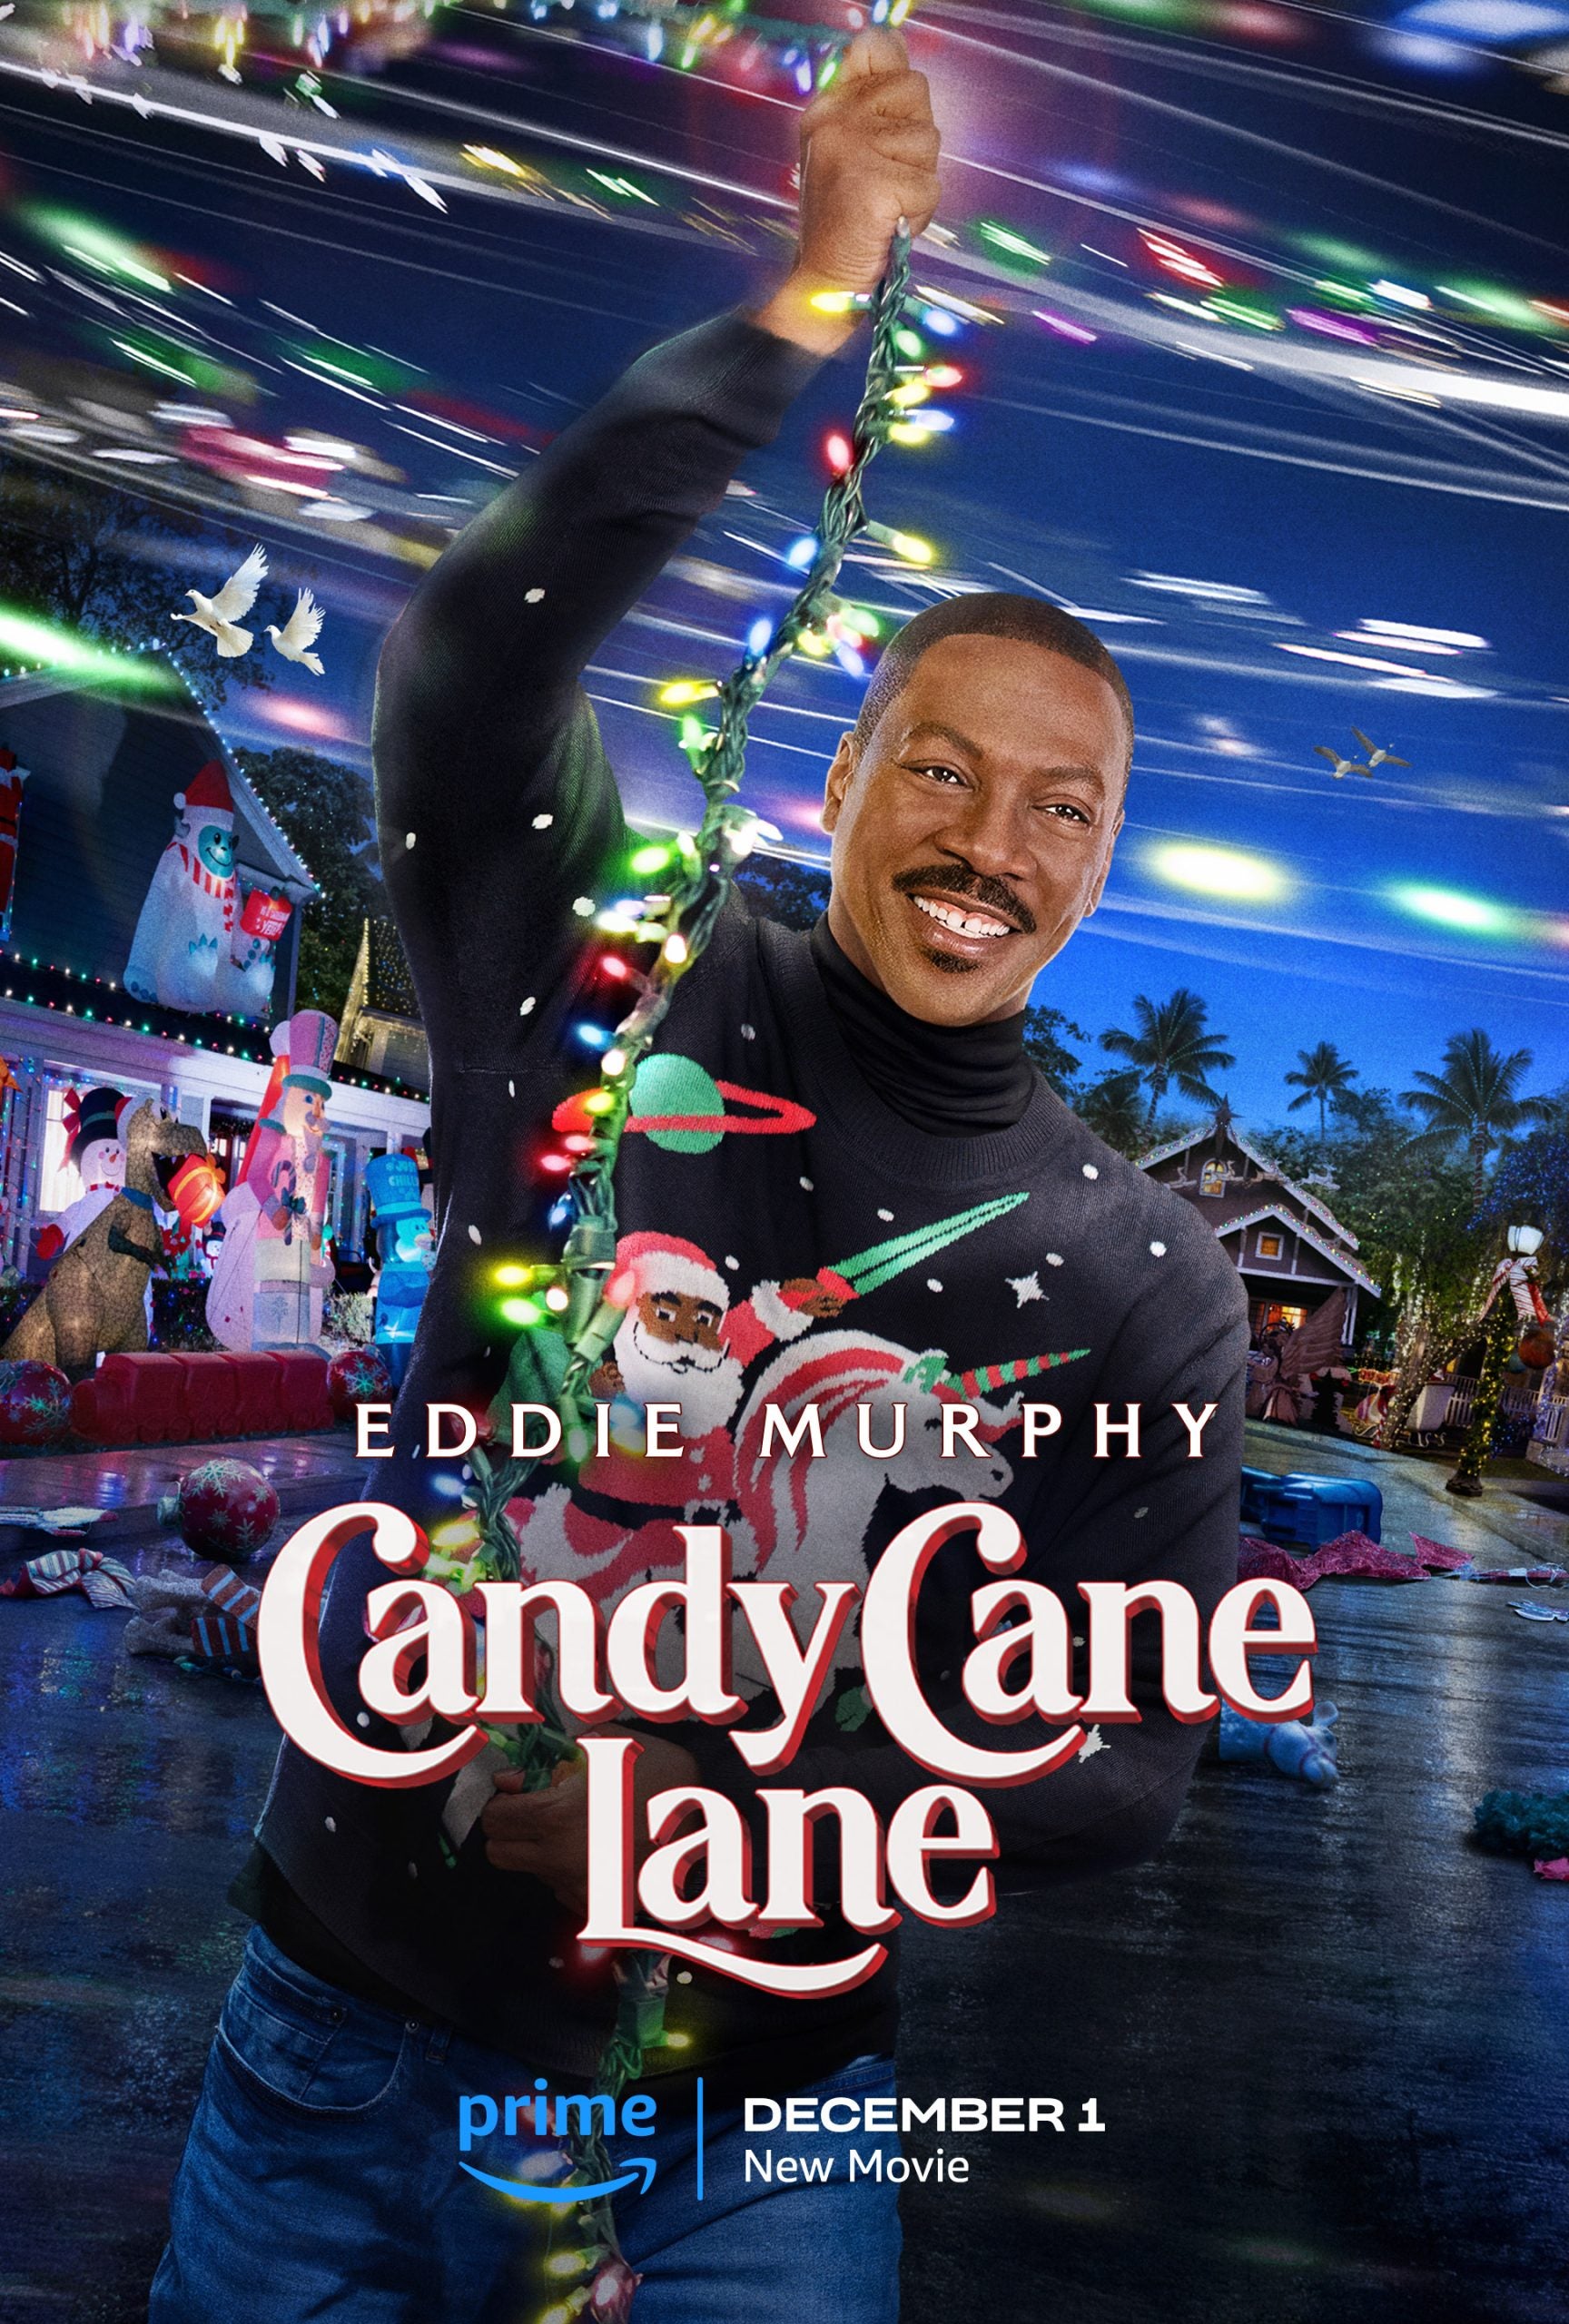 Eddie Murphy And Tracee Ellis Ross Celebrate The Holidays In ‘Candy Cane Lane’ Trailer